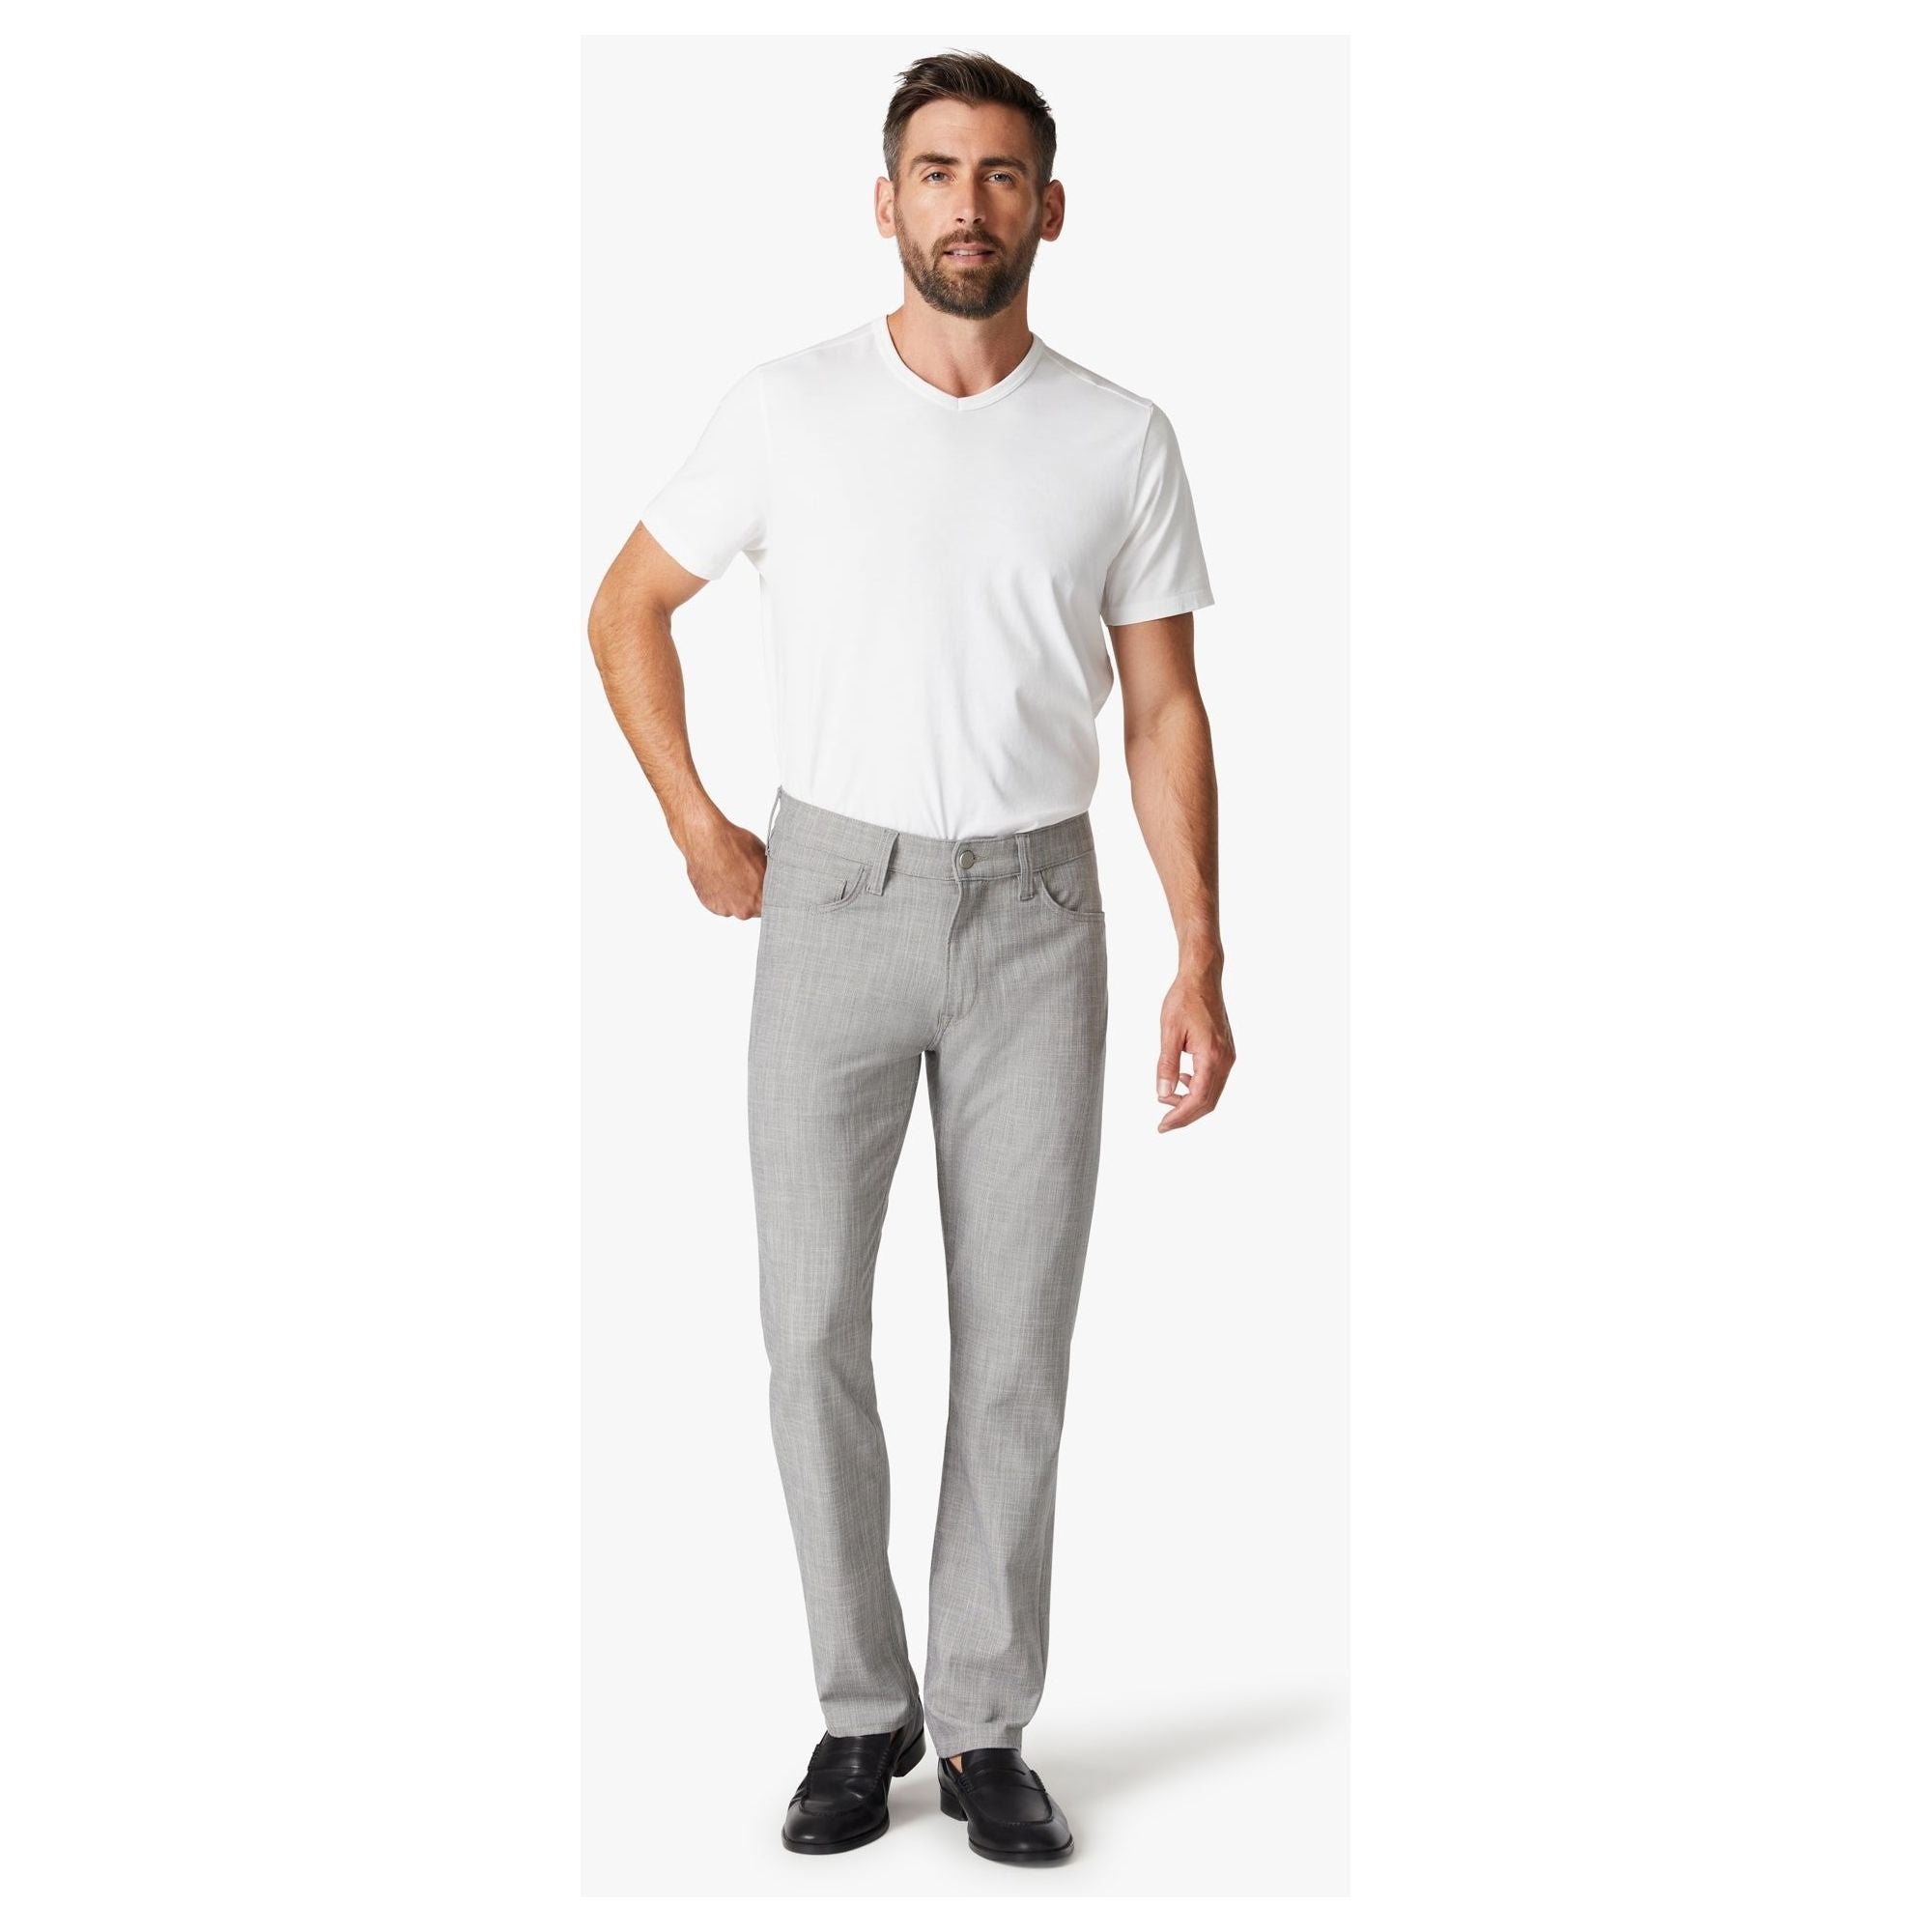 34 Heritage - Courage Straight Leg Pants In Magnet Cross Twill-SQ5053482